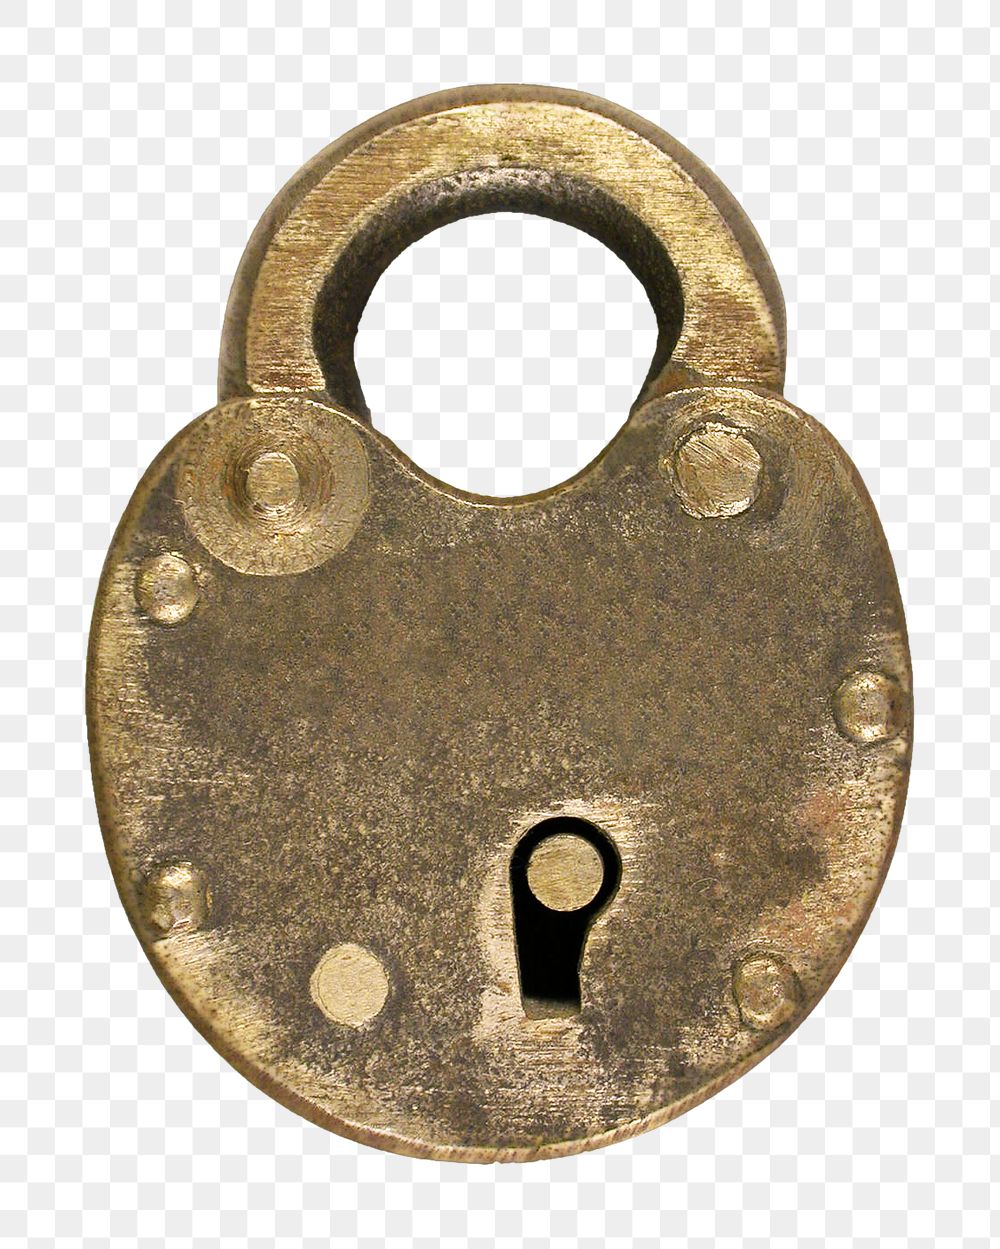 Vintage padlock png, old object designed by H. C. Jones, transparent background. Remixed by rawpixel.